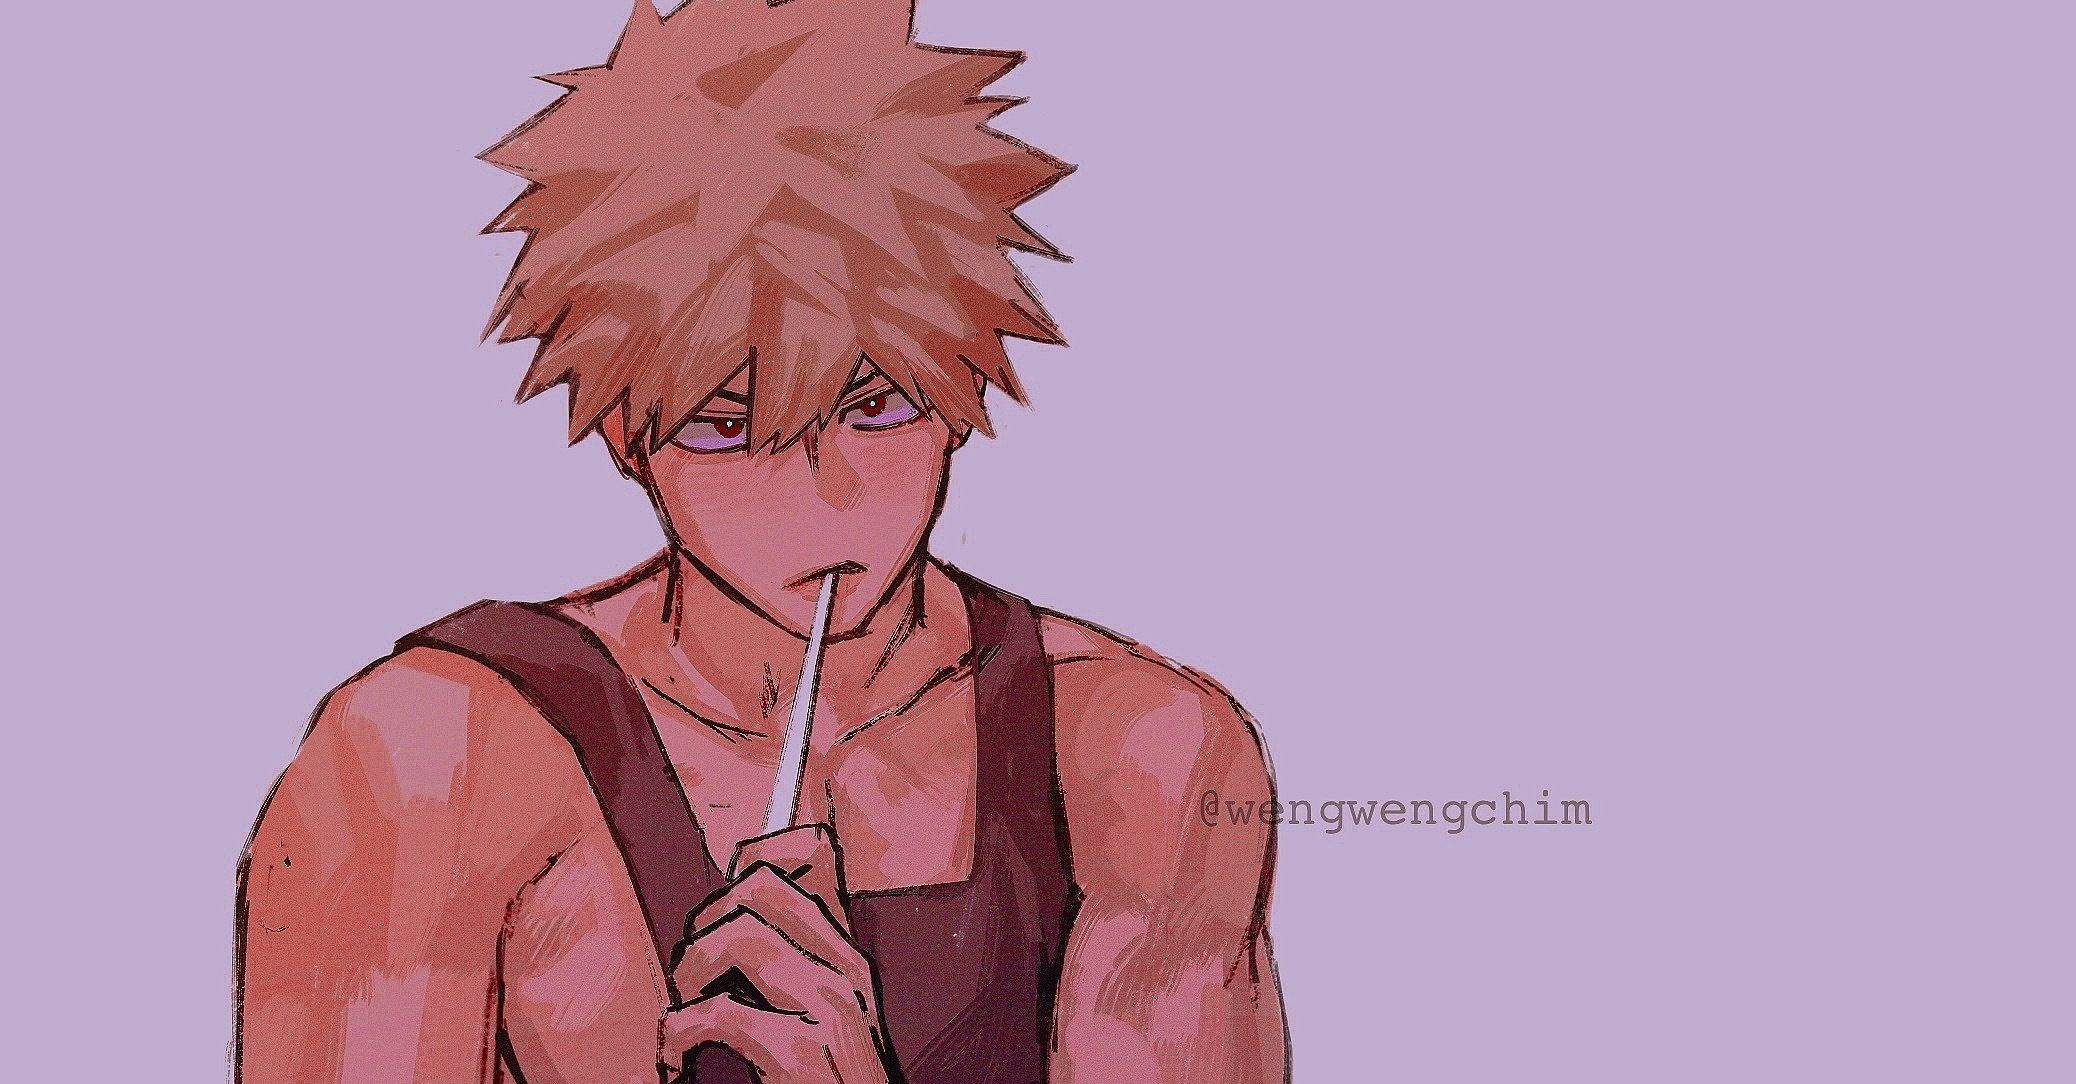 A brown-haired boy in a black tank top, smoking a cigarette. - Bakugo